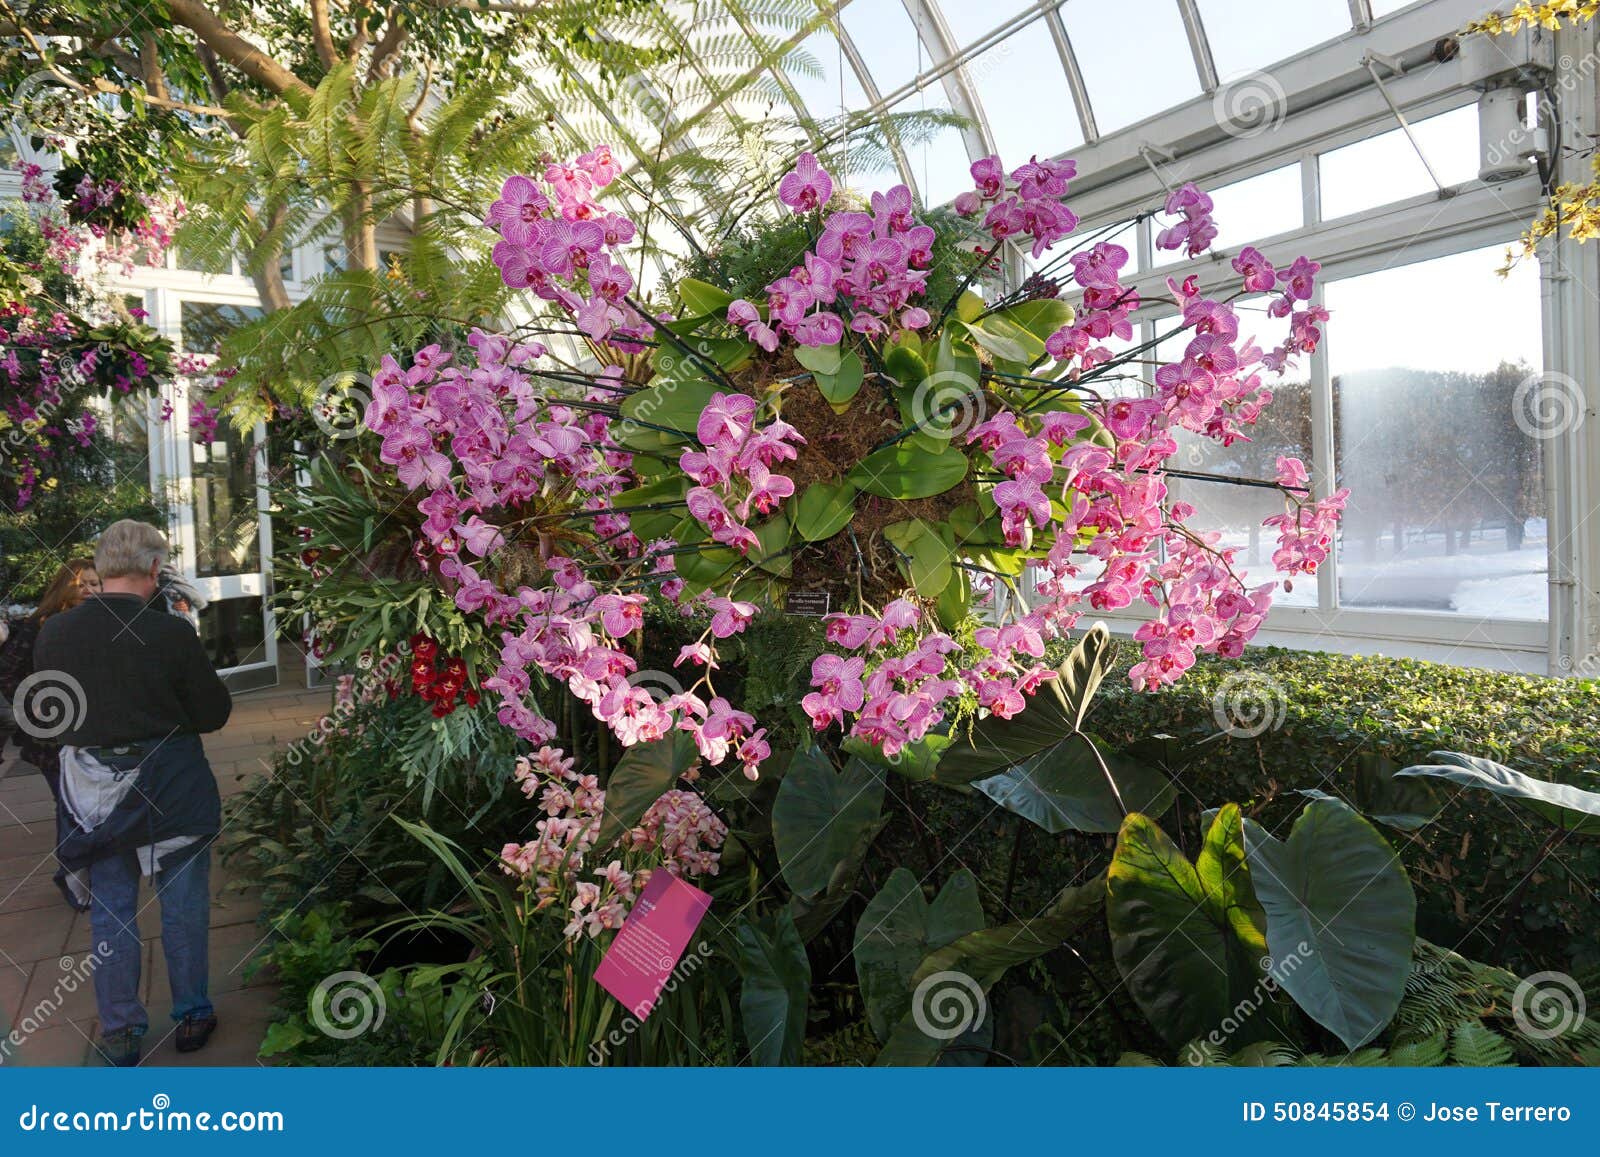 The 2015 Orchid Show Chandeliers 180 Editorial Stock Image